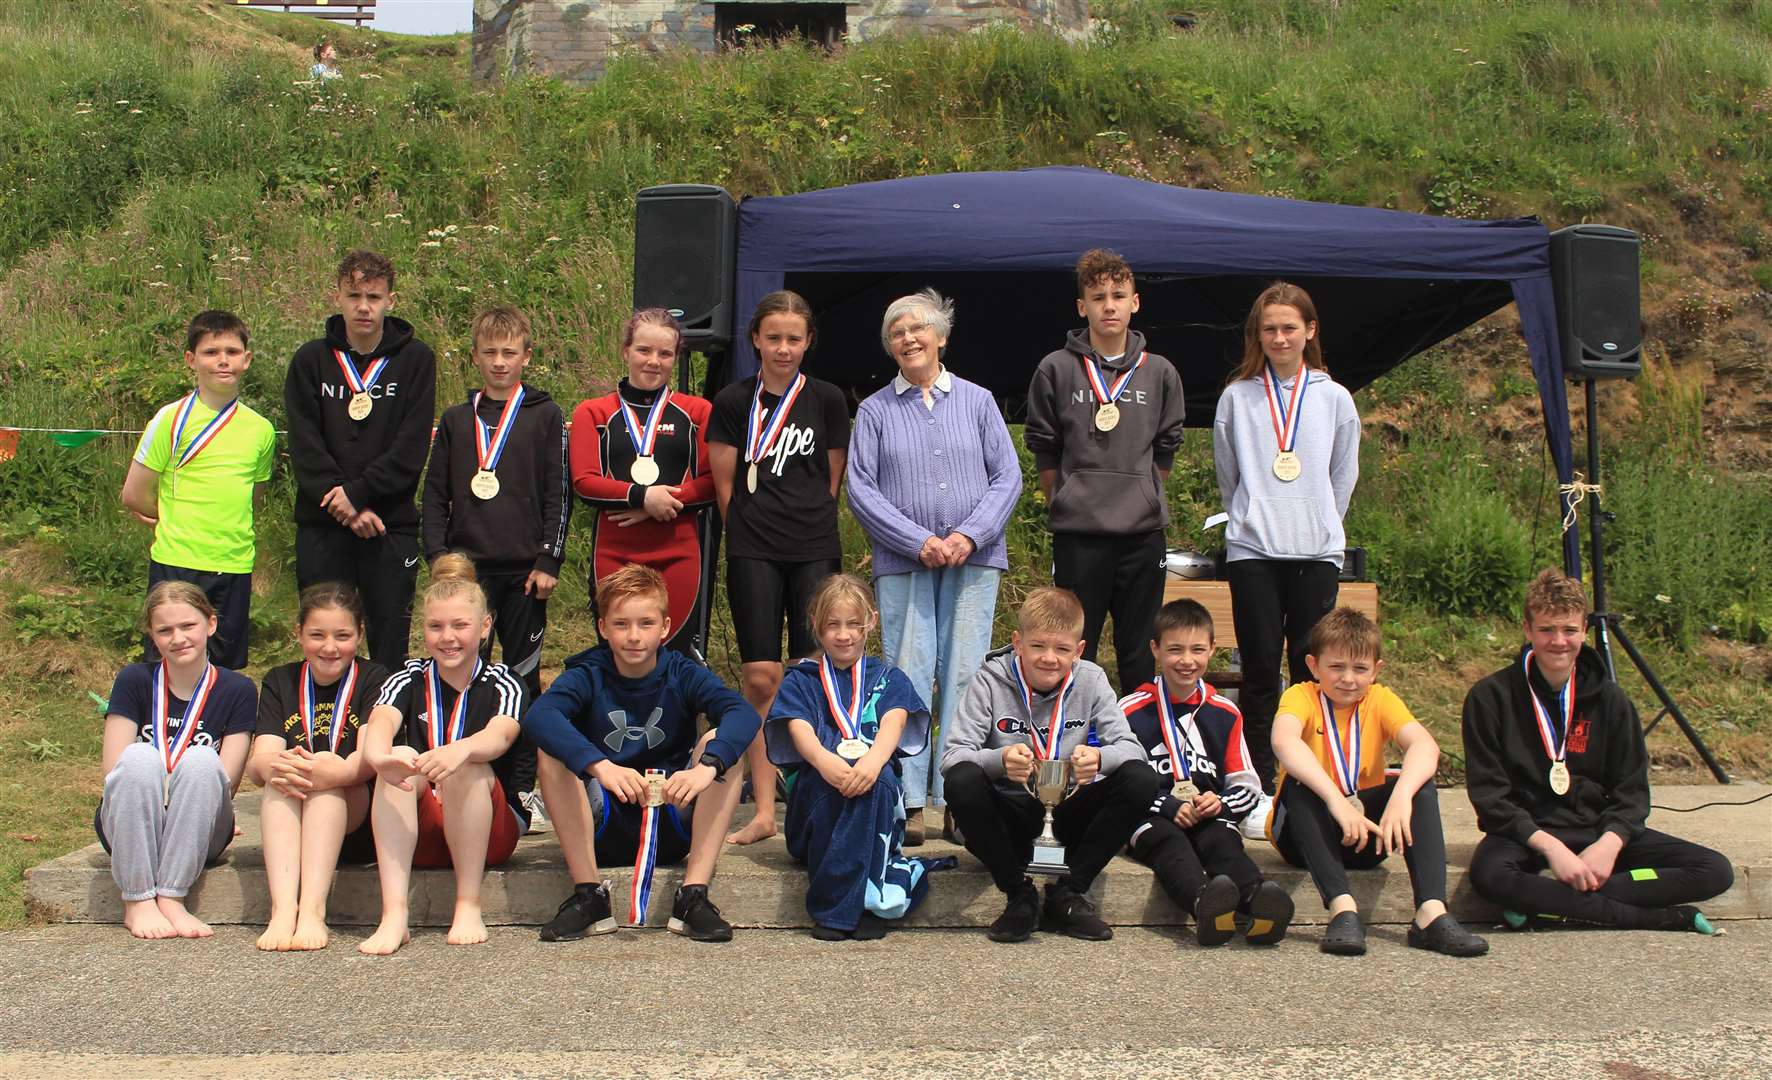 Swimmers from all the teams who took part, pictured with Joan Manson who presented the trophy and medals. Back row (from left): Thomas Merchant, Rhys Edwards, Ryan McNeill, Morven Miller, Carla Edwards, Owen Edwards and Tamzin Rosie. Front: Lena Forbes, Iona Gill, Eva Roberston, Joe Gill, Jolee Statham, Ross Harper, Harry McNeill, Jack Taylor and Glenn Miller. Picture: Alan Hendry